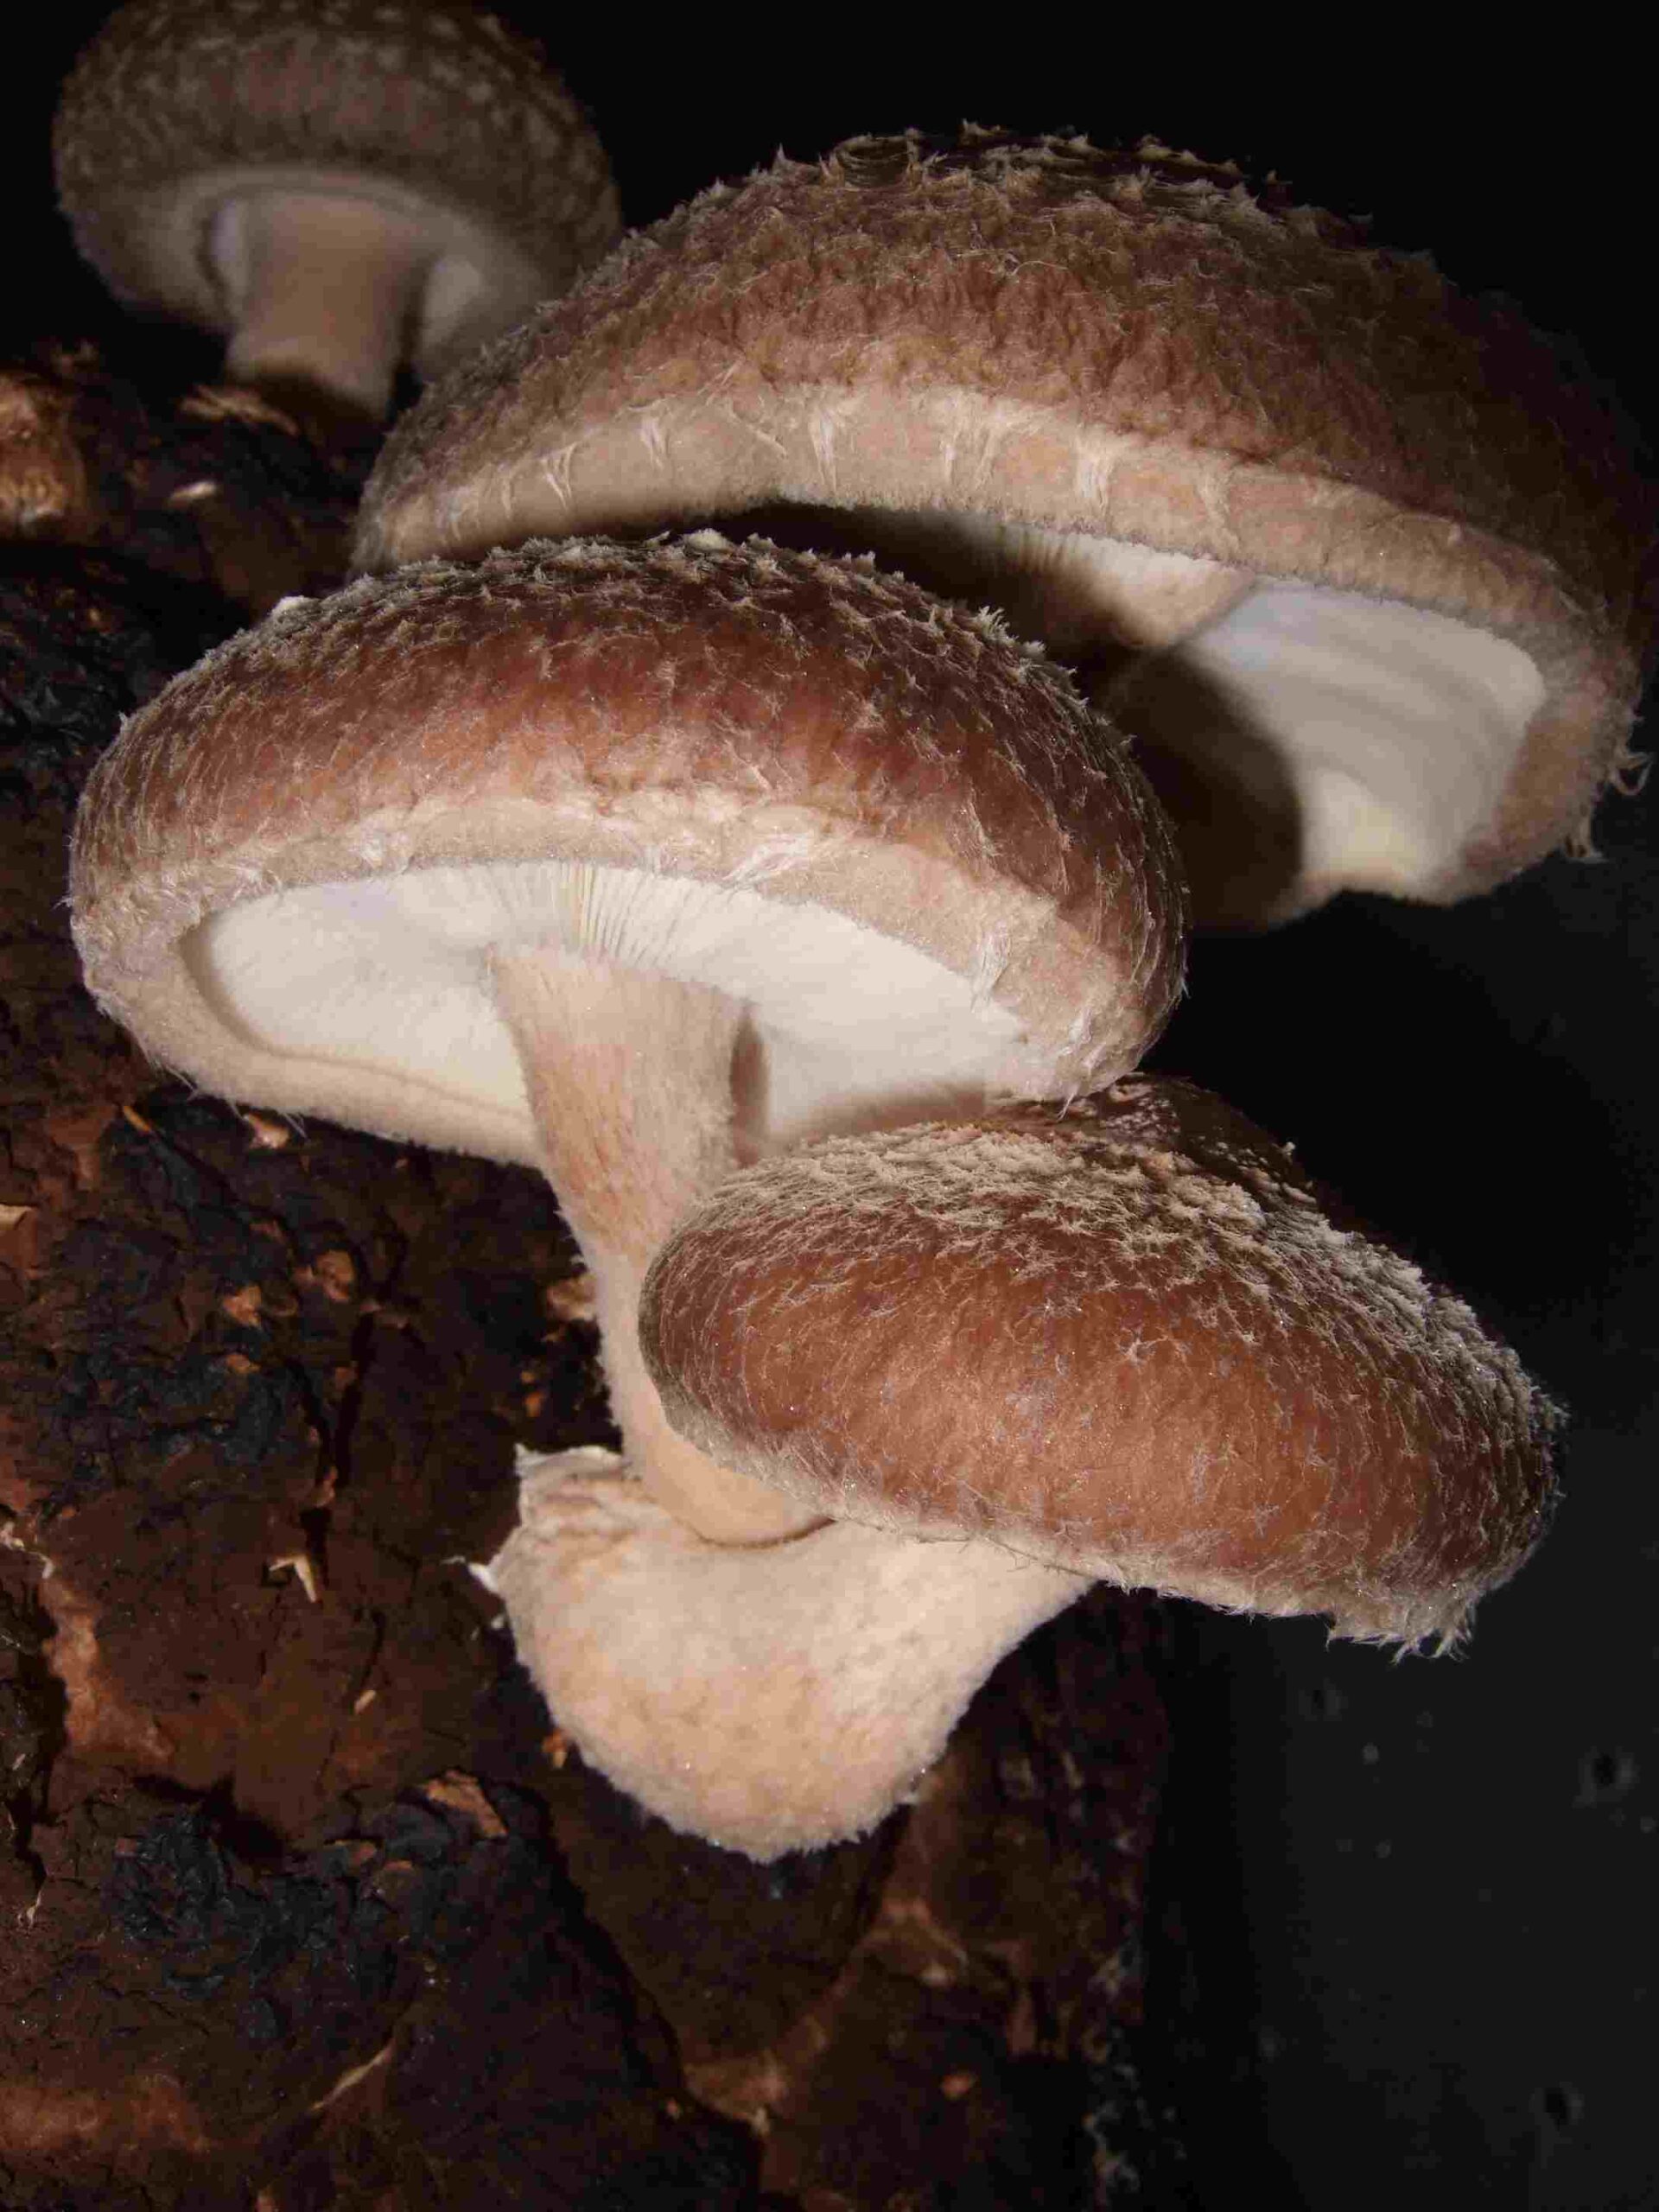 Decomposers in the Rainforest: Fungi like Lentinula edodes (Shiitake Mushroom) Contribute to Natural Recycling of Nutrients and Biomass (Credit: frankenstoen 2008 .CC BY 2.0.)